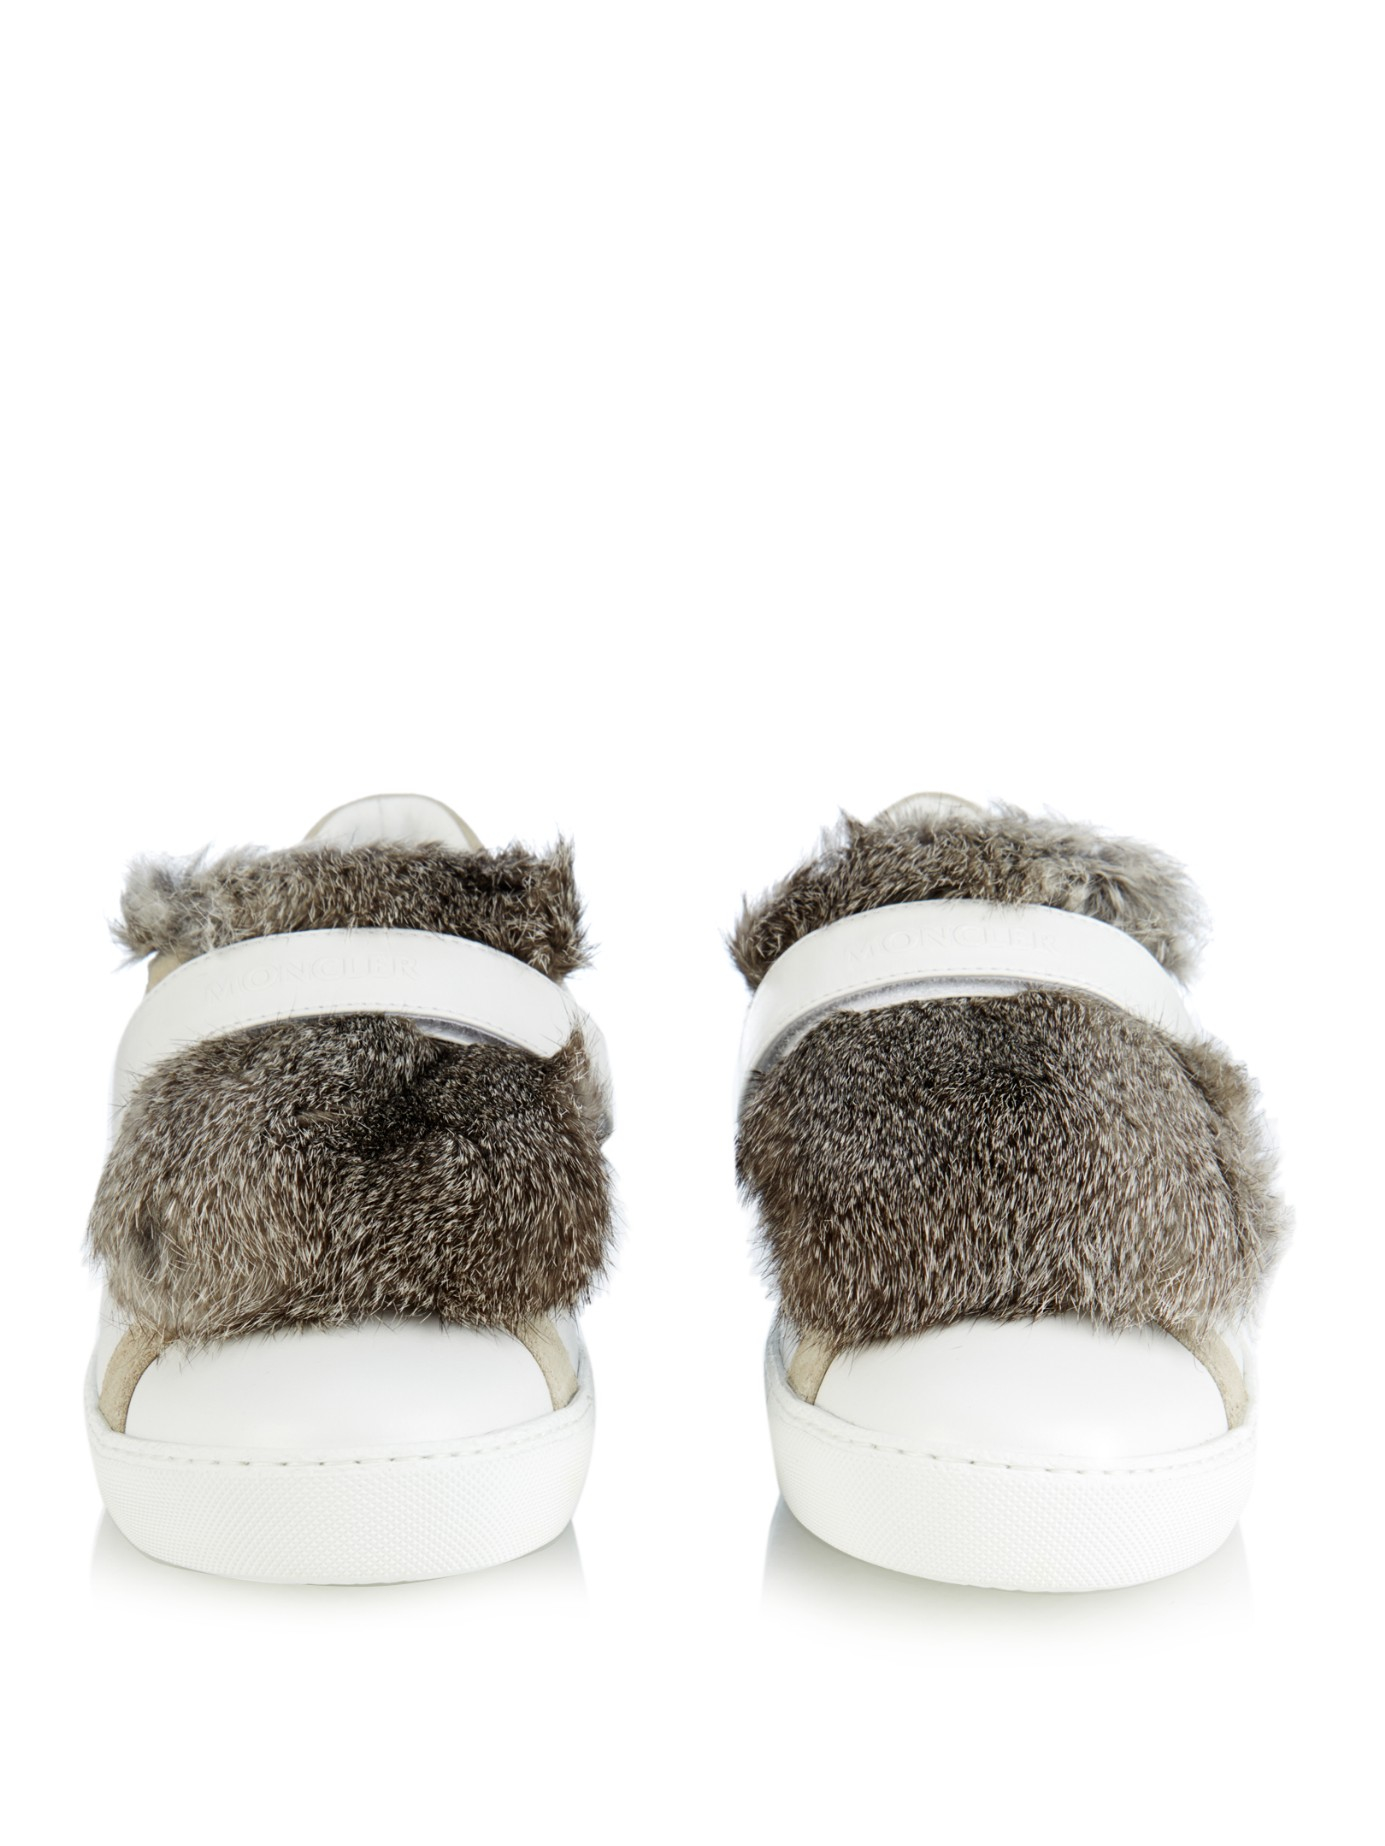 moncler fur shoes Cheaper Than Retail Price> Buy Clothing, Accessories and  lifestyle products for women & men -